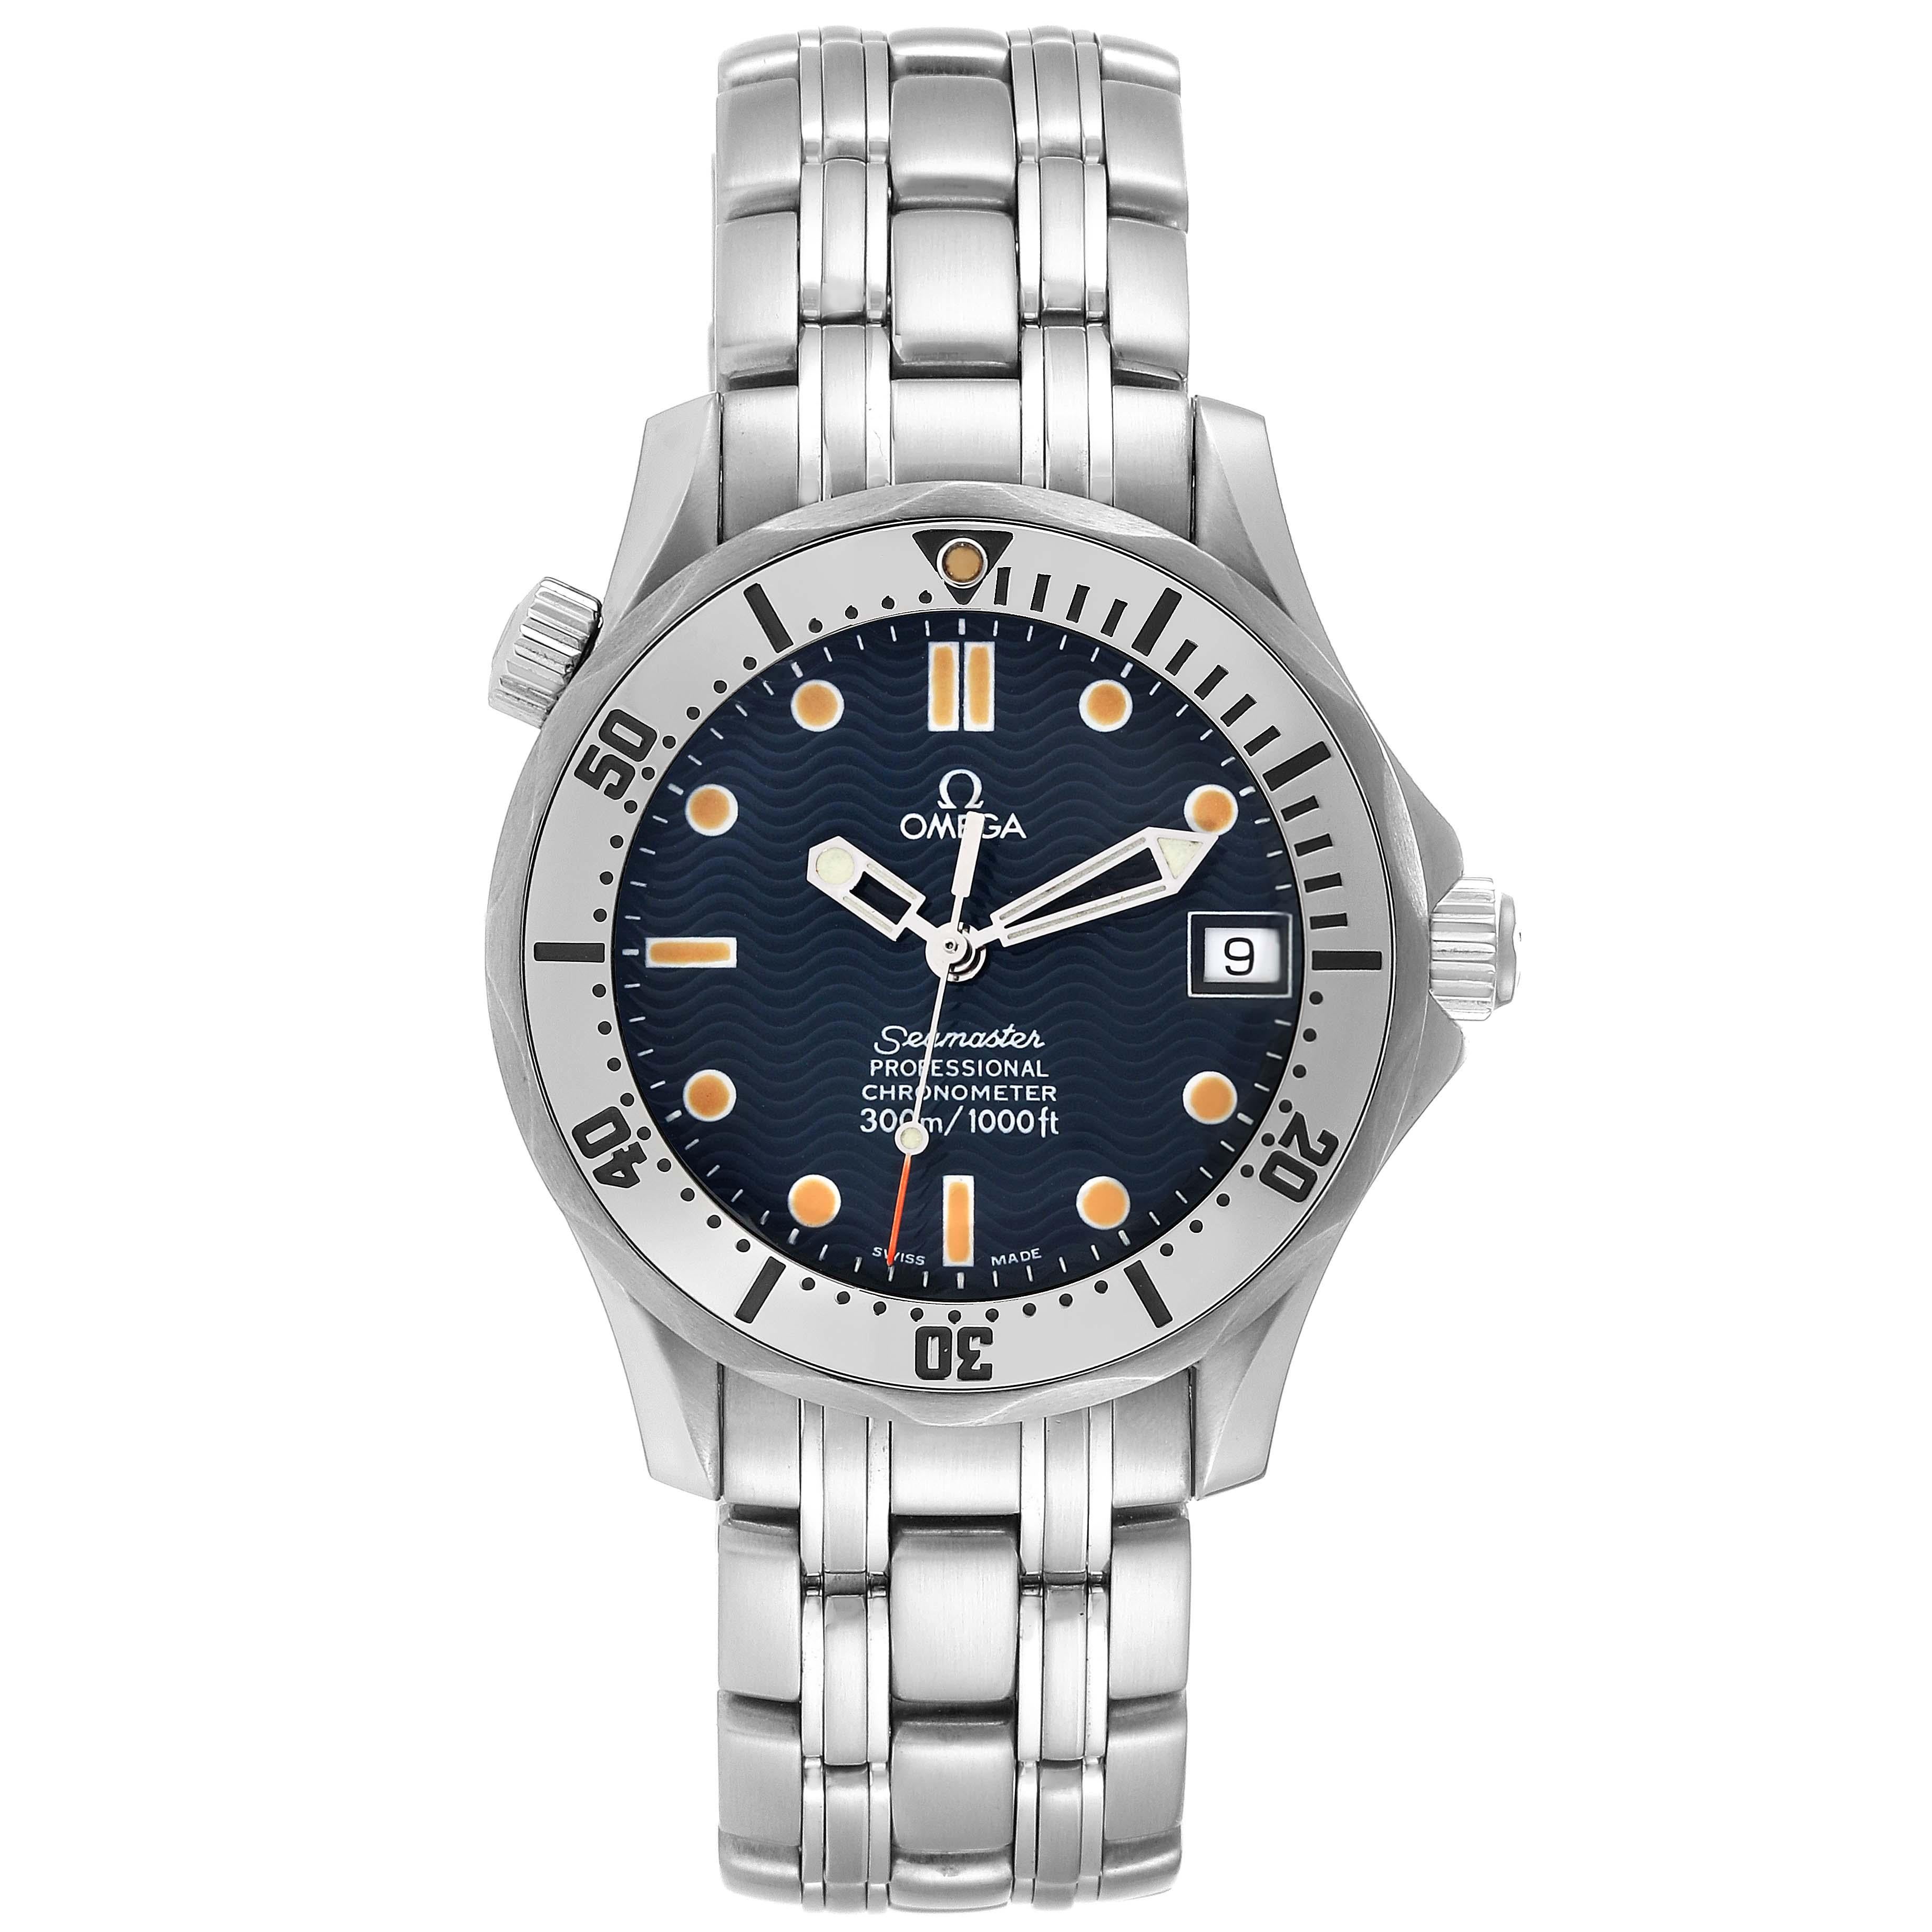 Omega Seamaster Midsize 36 Blue Dial Steel Mens Watch 2552.80.00. Automatic self-winding movement. Stainless steel case 36.25 mm in diameter. Omega logo on crown. Stainless steel unidirectional rotating bezel. Scratch resistant sapphire crystal.